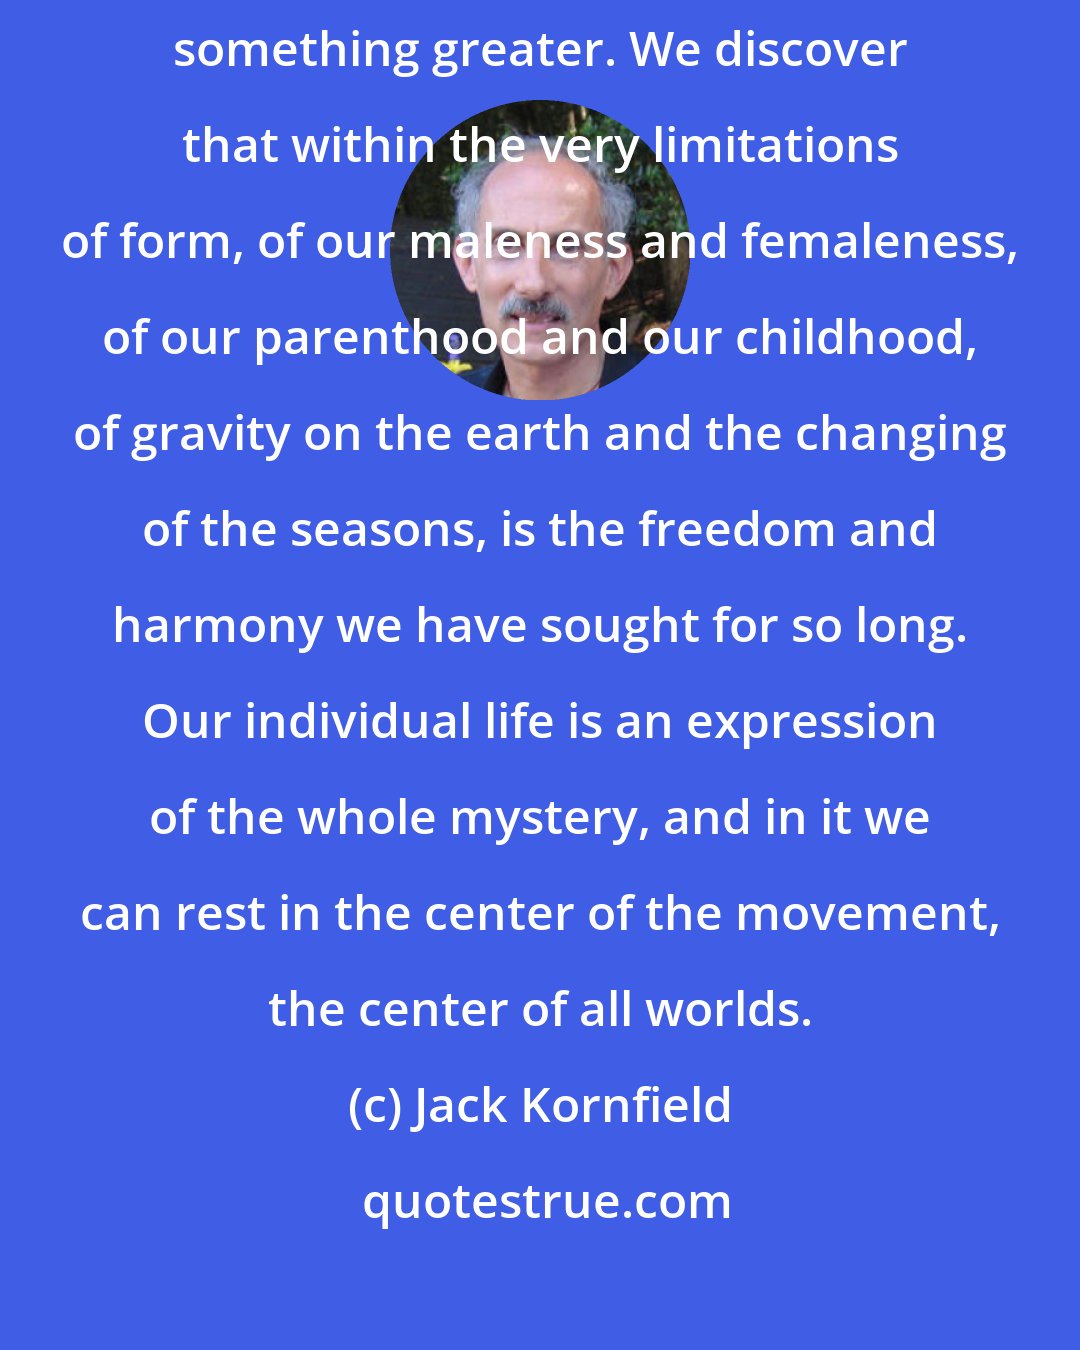 Jack Kornfield: When the stories of our life no longer bind us, we discover within them something greater. We discover that within the very limitations of form, of our maleness and femaleness, of our parenthood and our childhood, of gravity on the earth and the changing of the seasons, is the freedom and harmony we have sought for so long. Our individual life is an expression of the whole mystery, and in it we can rest in the center of the movement, the center of all worlds.